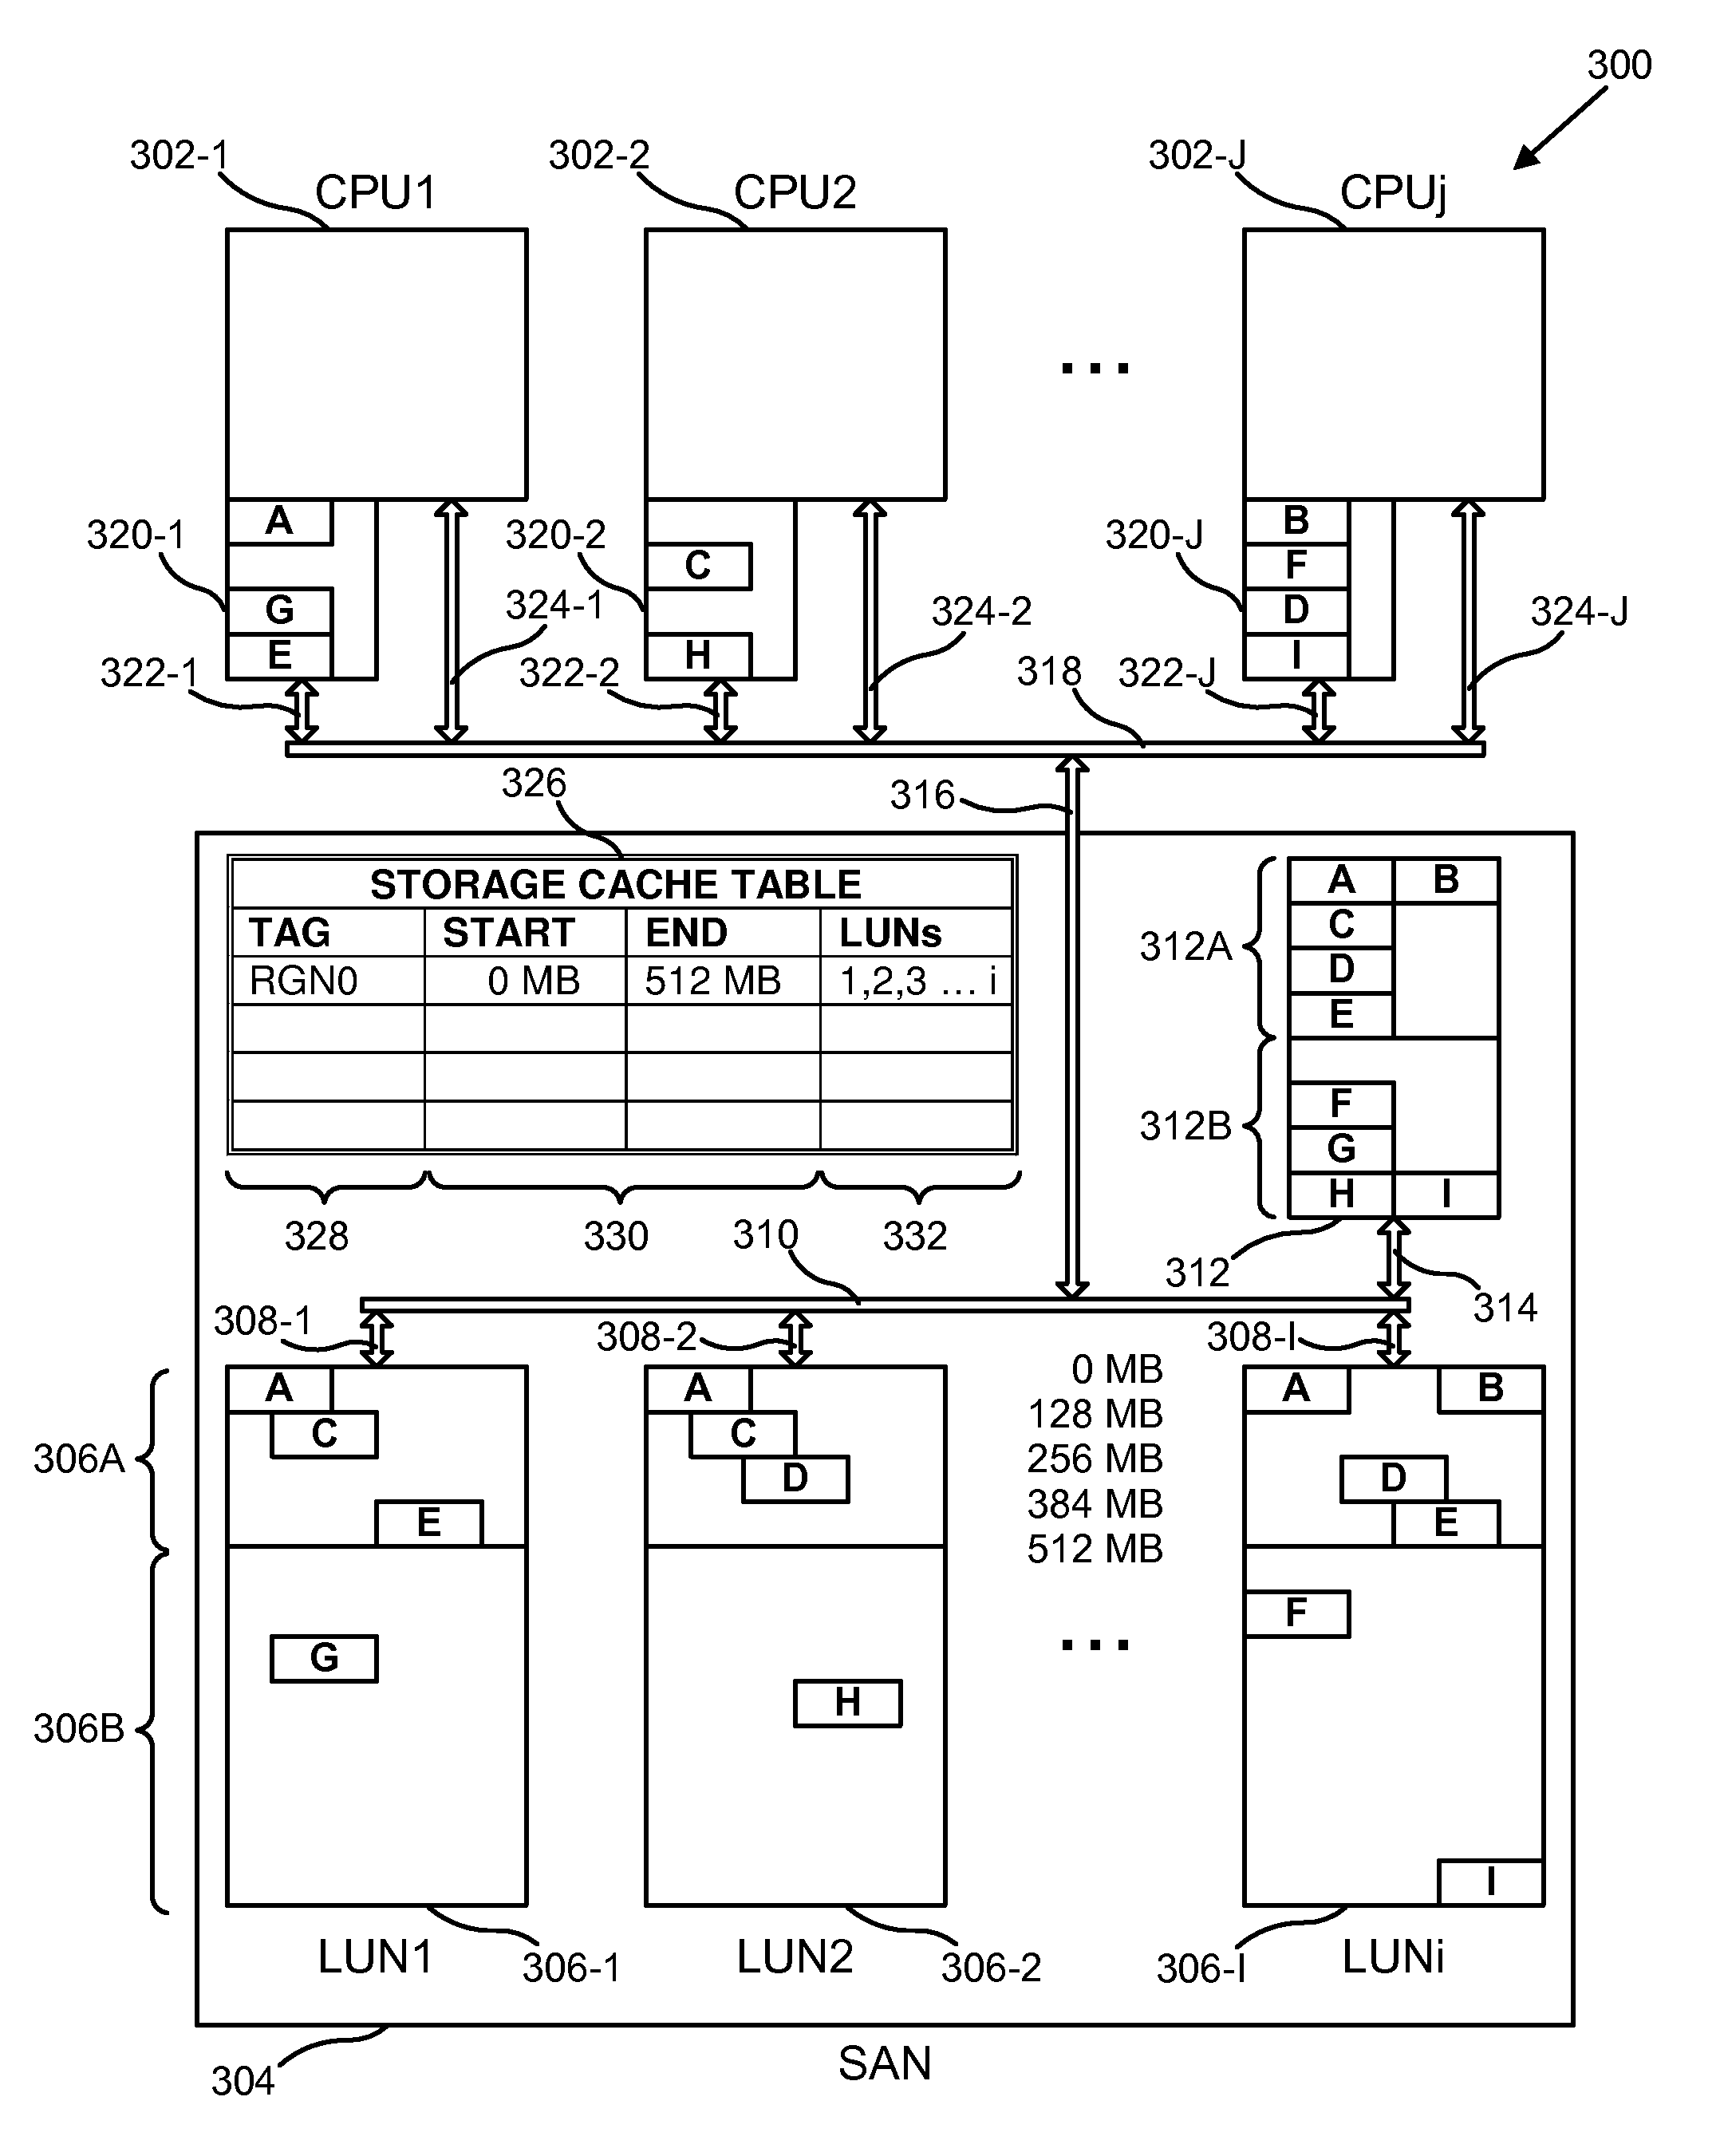 Apparatus, system and method for storage cache deduplication